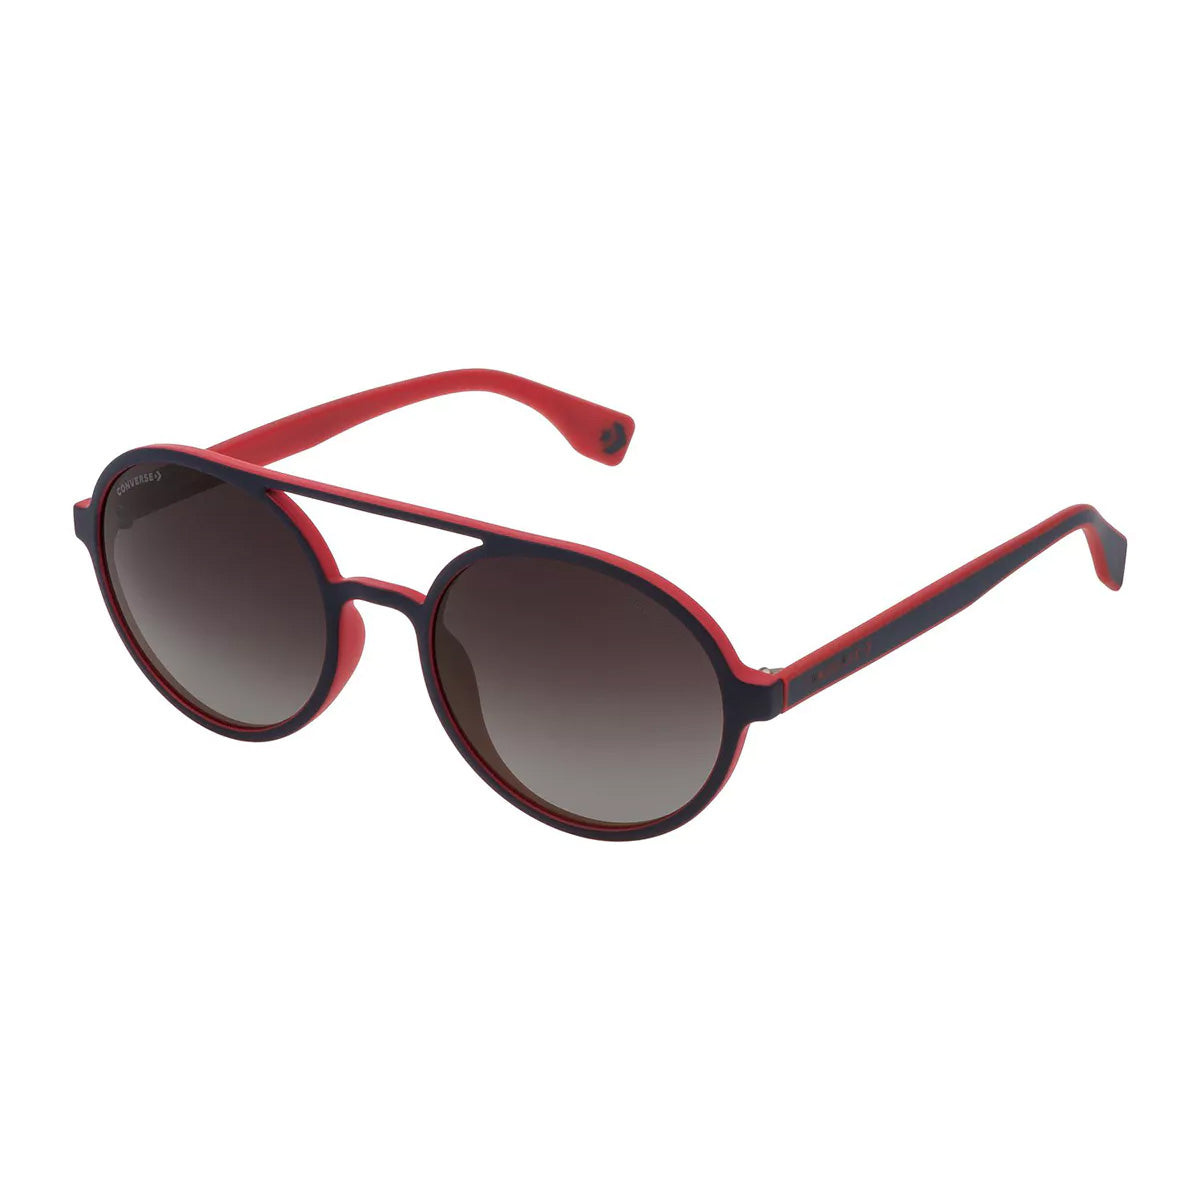 Converse Men's Sunglasses Pilot Navy and Red SCO192 92EP